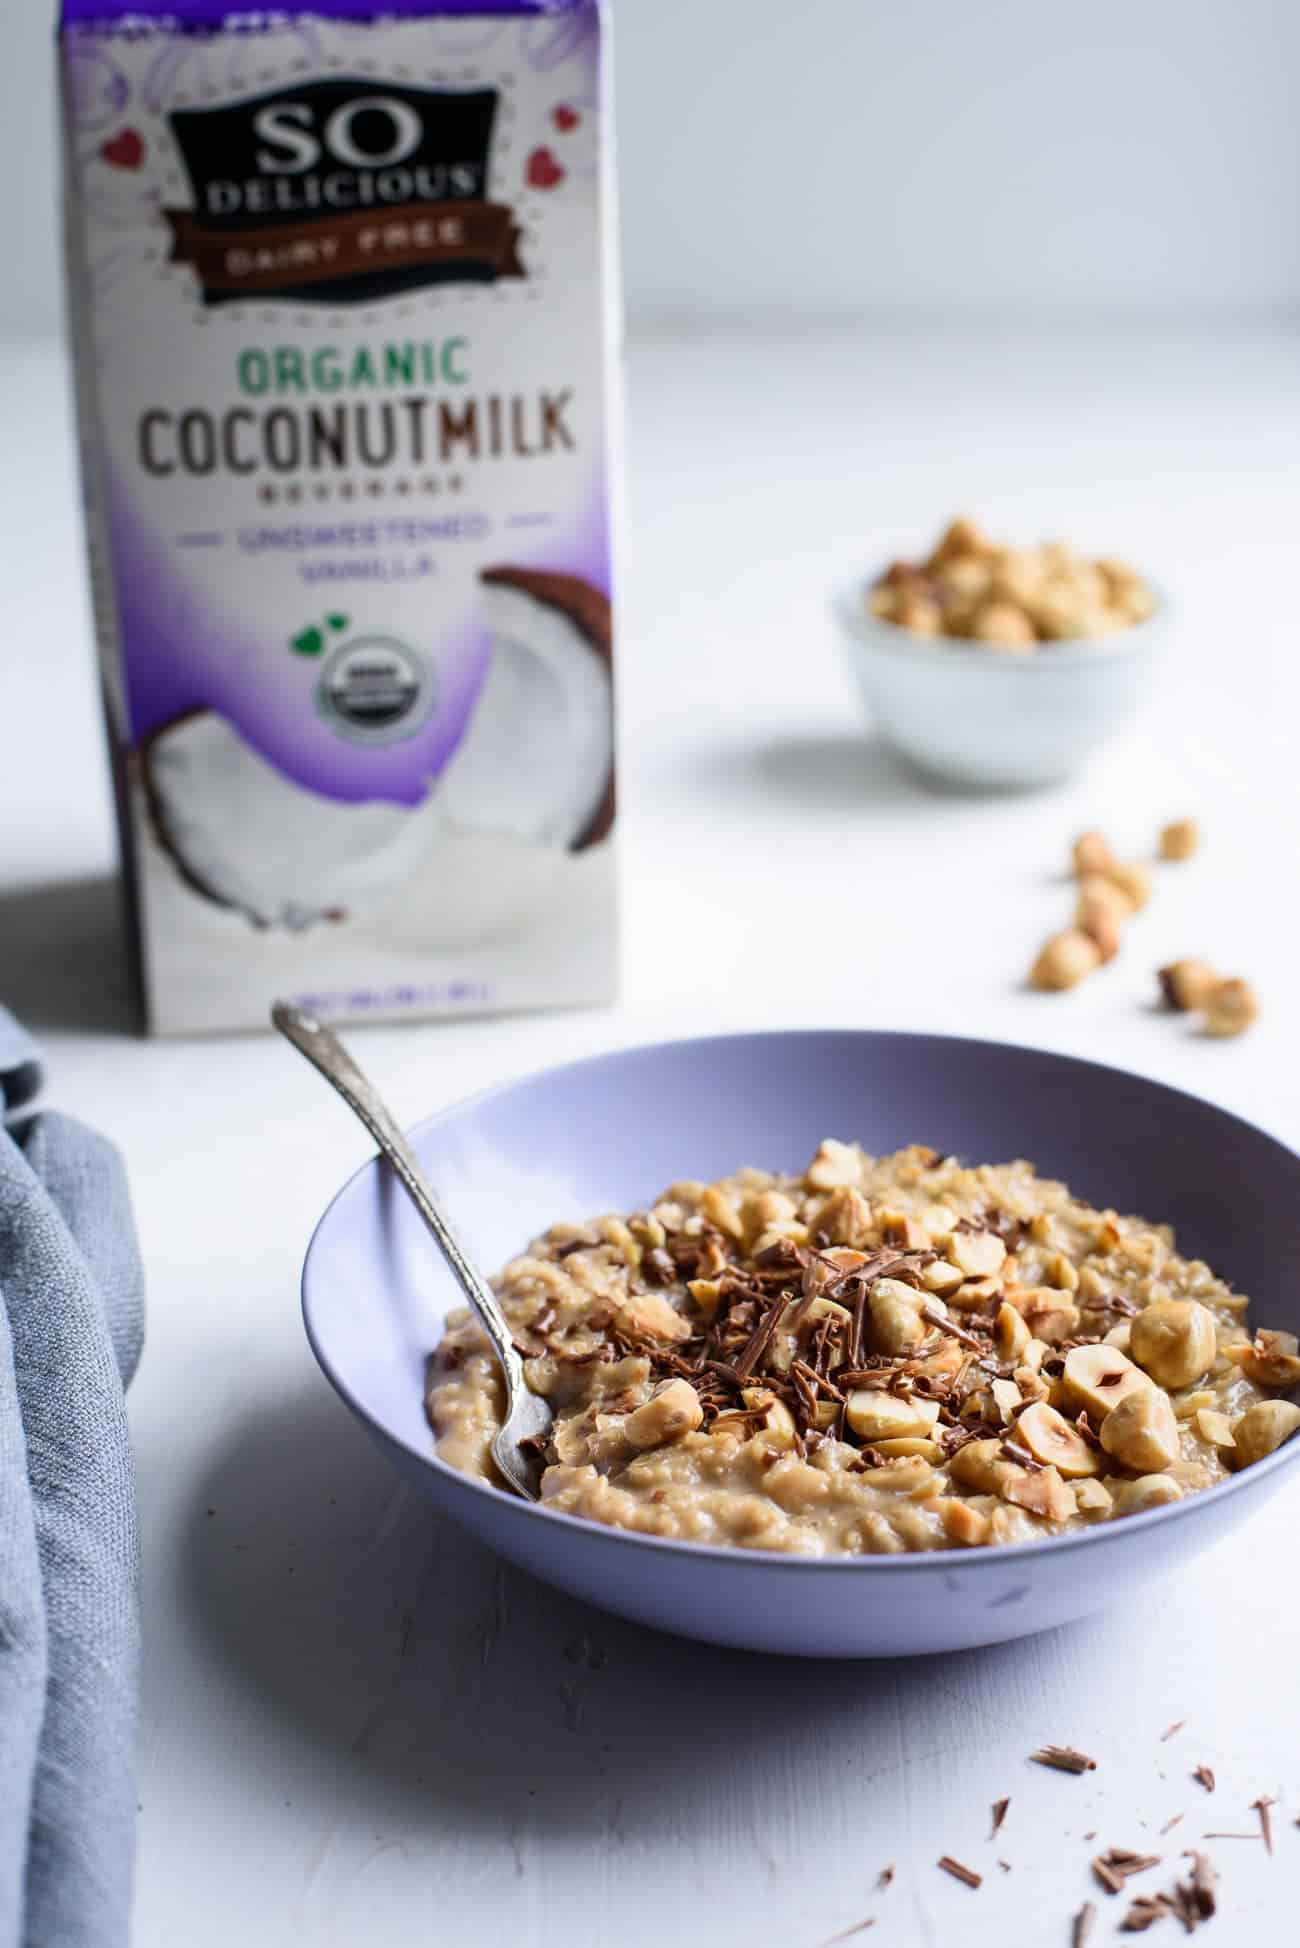 A bowl of coffee oatmeal on a white table next to a carton of So Delicious brand coconutmilk